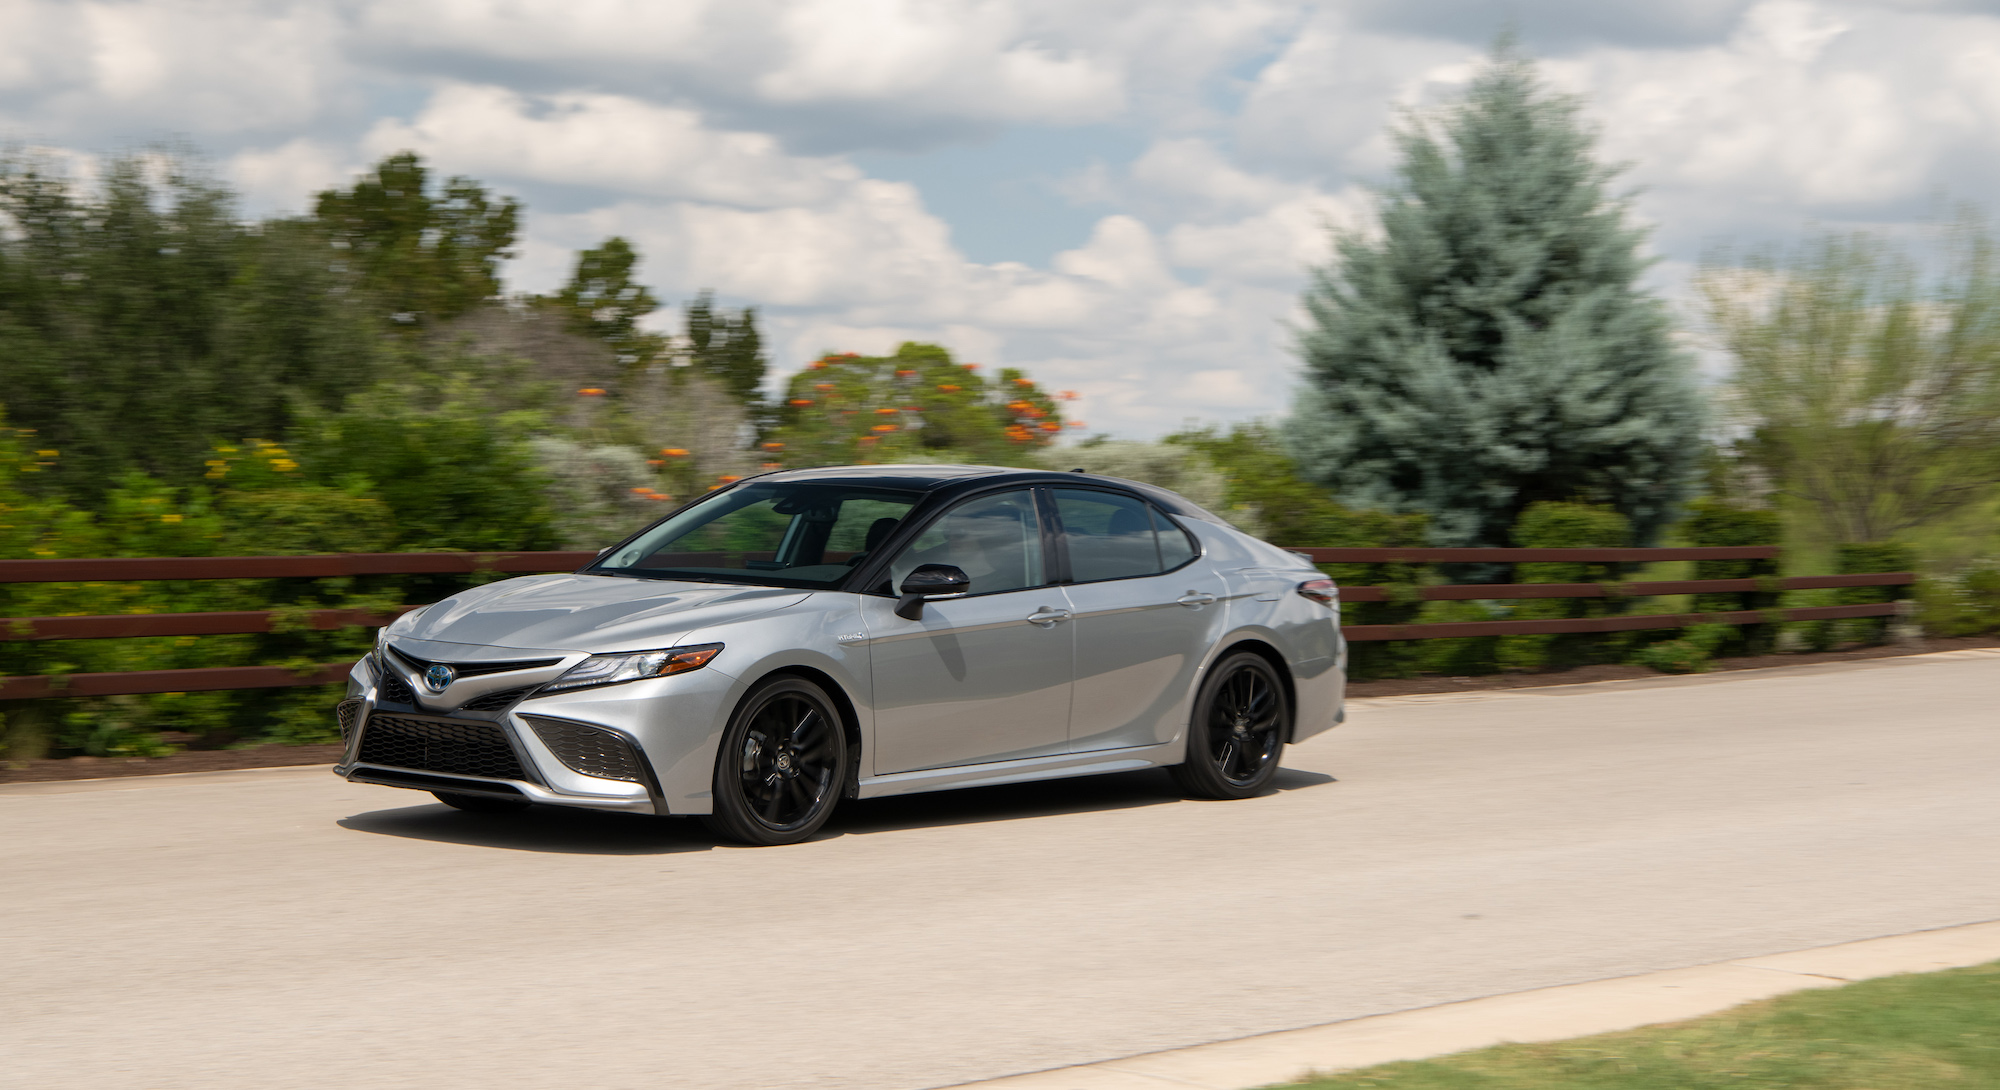 A silver 2021 Camry XSE Hybrid midsize sedan traveling on a country road along a brown wooden fence and foliage